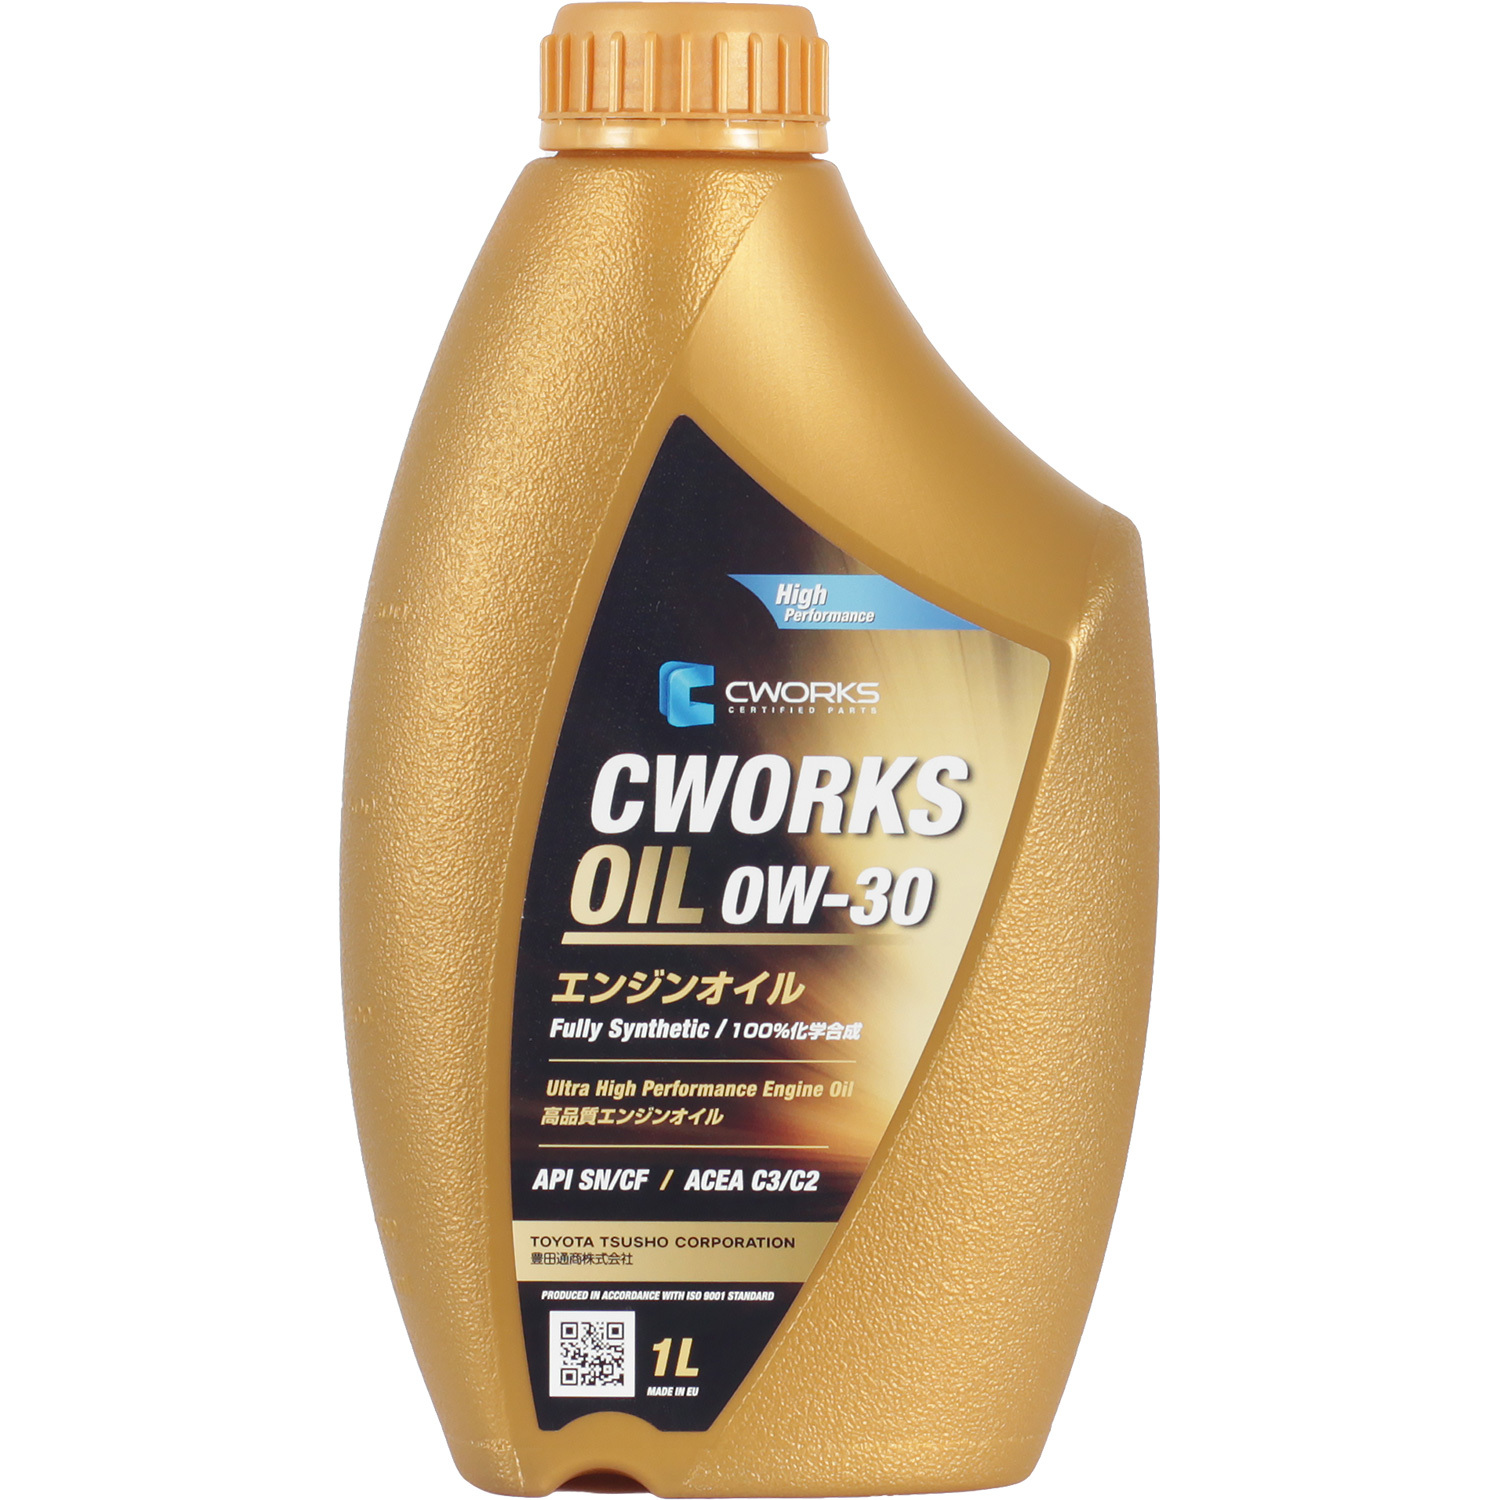 CWORKS Масло моторное Cworks OIL С2/С3 0W-30 1л cworks моторное масло cworks superia oil 5w 30 4 л